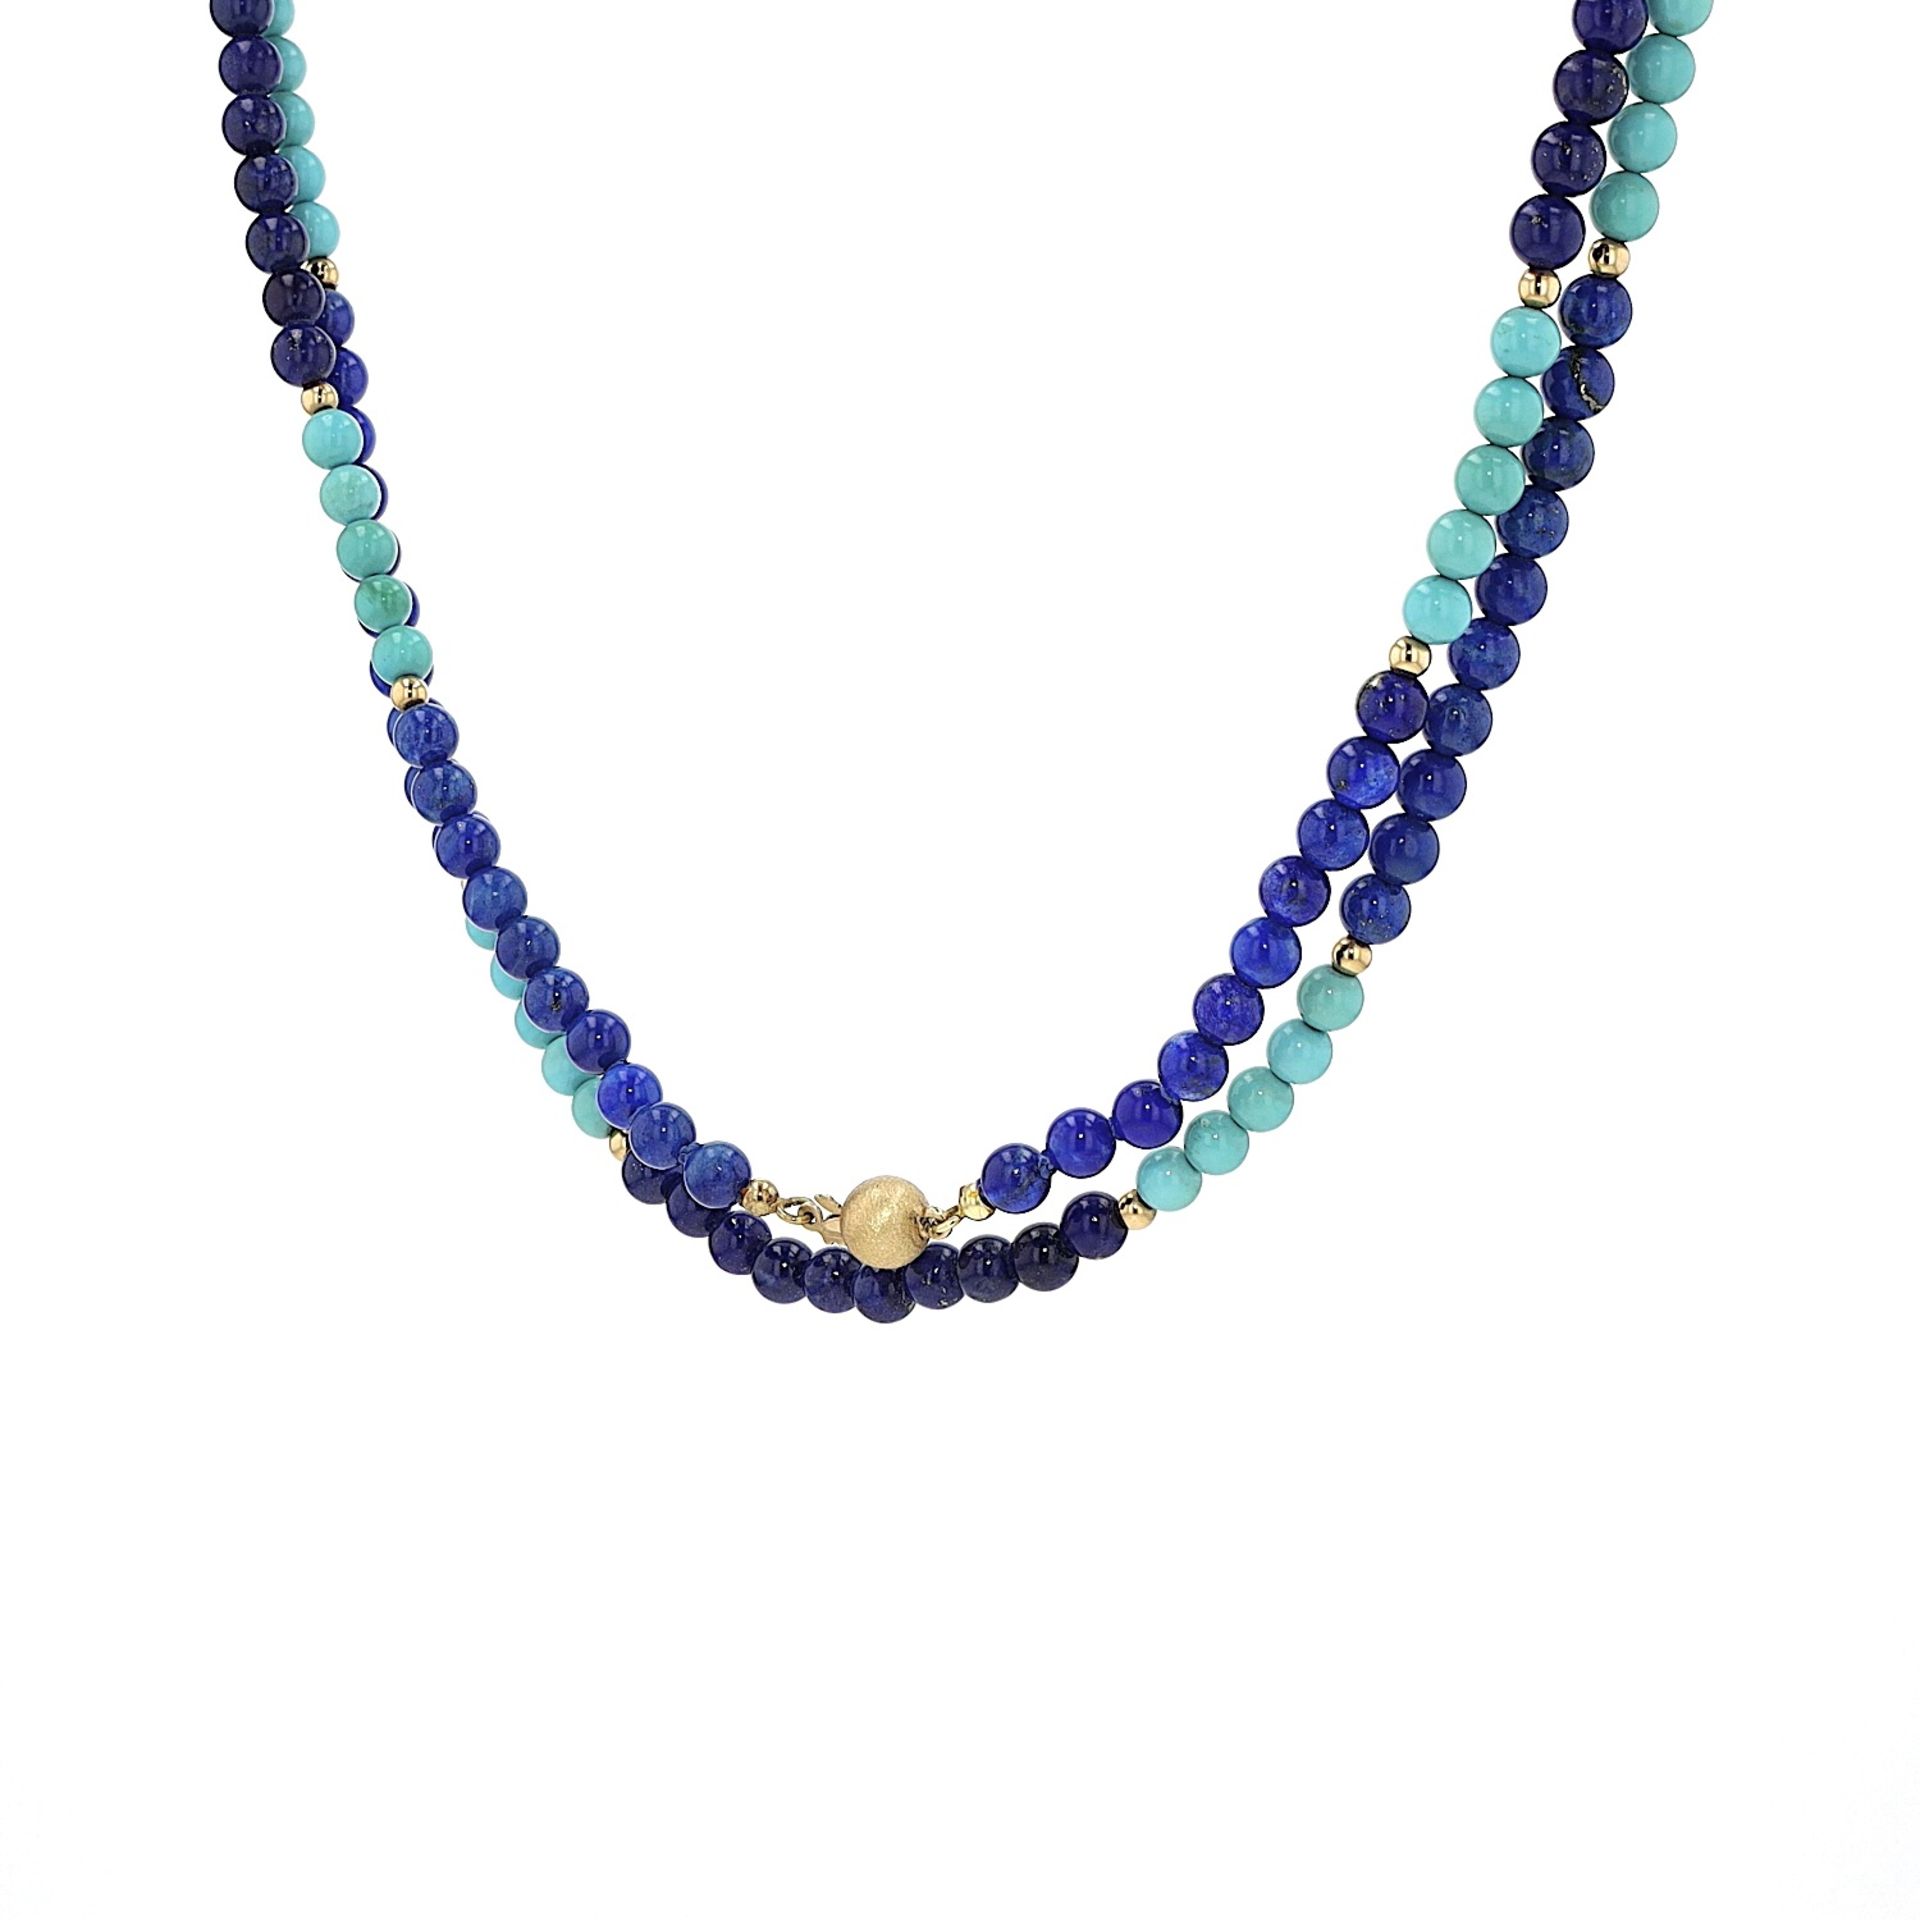 Necklace with gold beads and gemstone - Image 2 of 4